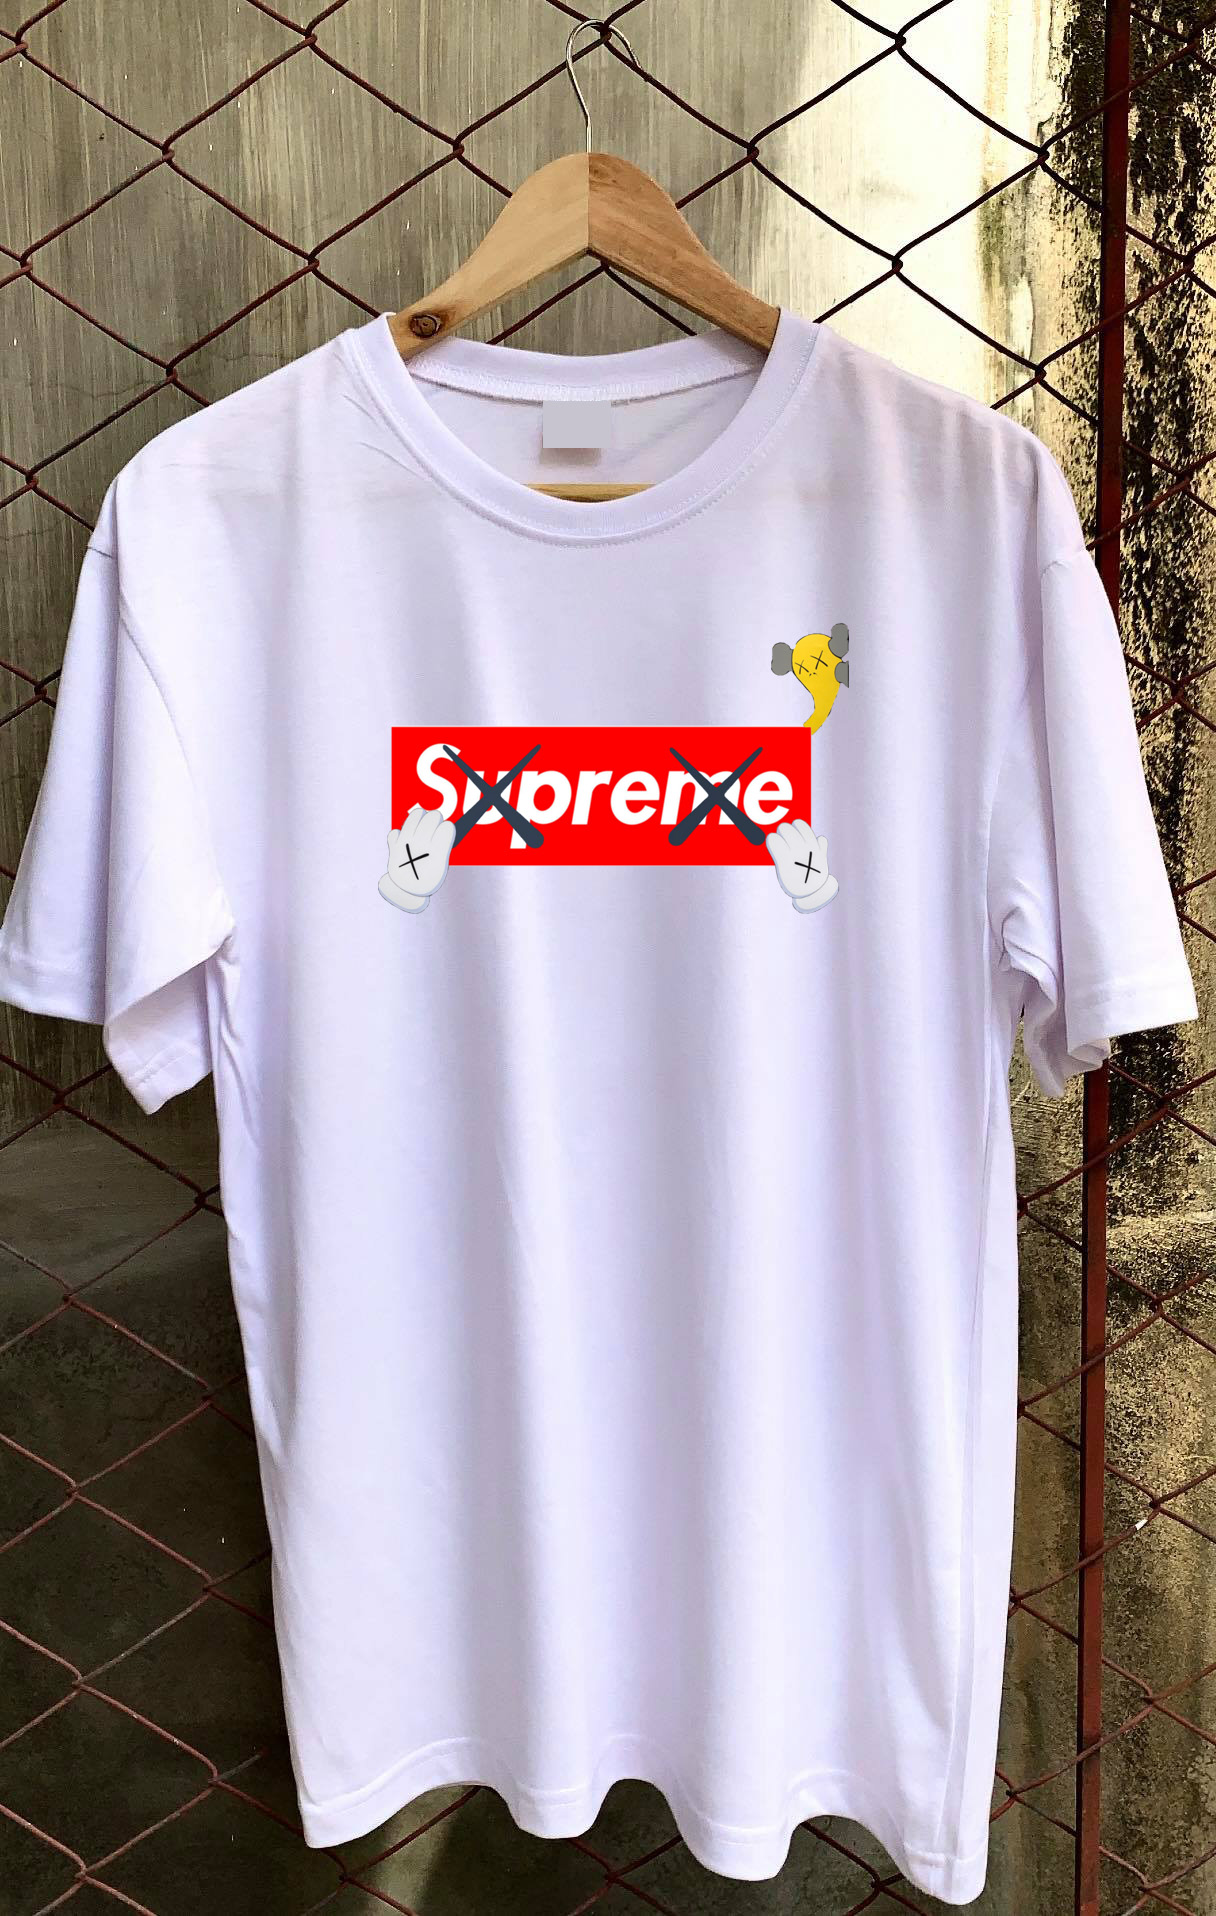 Japanese Supreme T-shirt For Men and Women High Quality and Affordable!